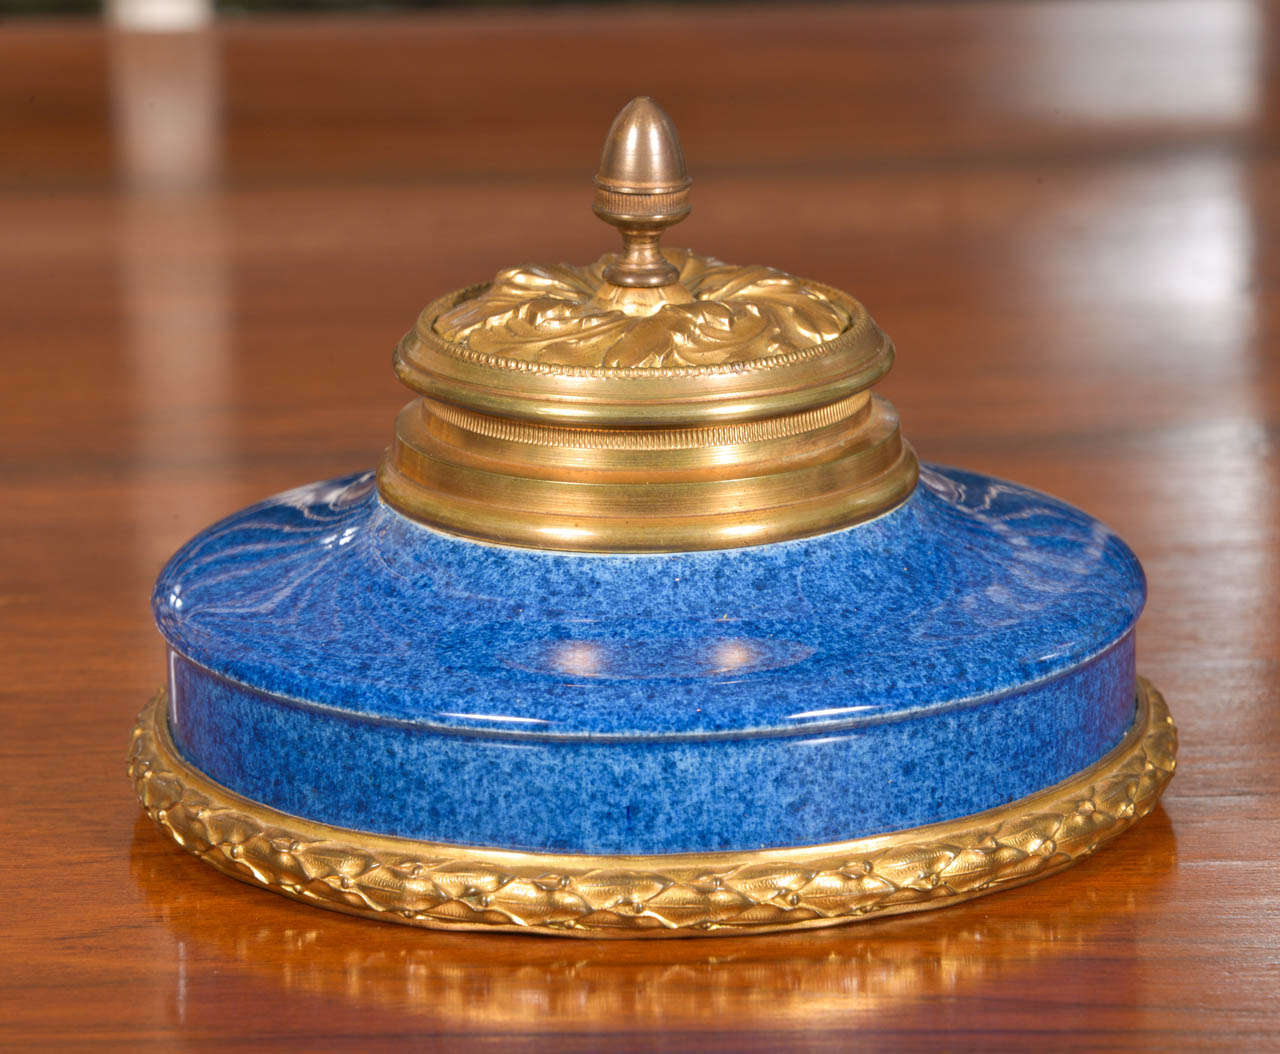 French Sevres pottery gilt bronze inkwell, circa 1900. The metal and pottery are in excellent condition with no damage. The pottery is a mottled blue glaze that has varying shades of blue. This is truly an outstanding piece and would be a fabulous